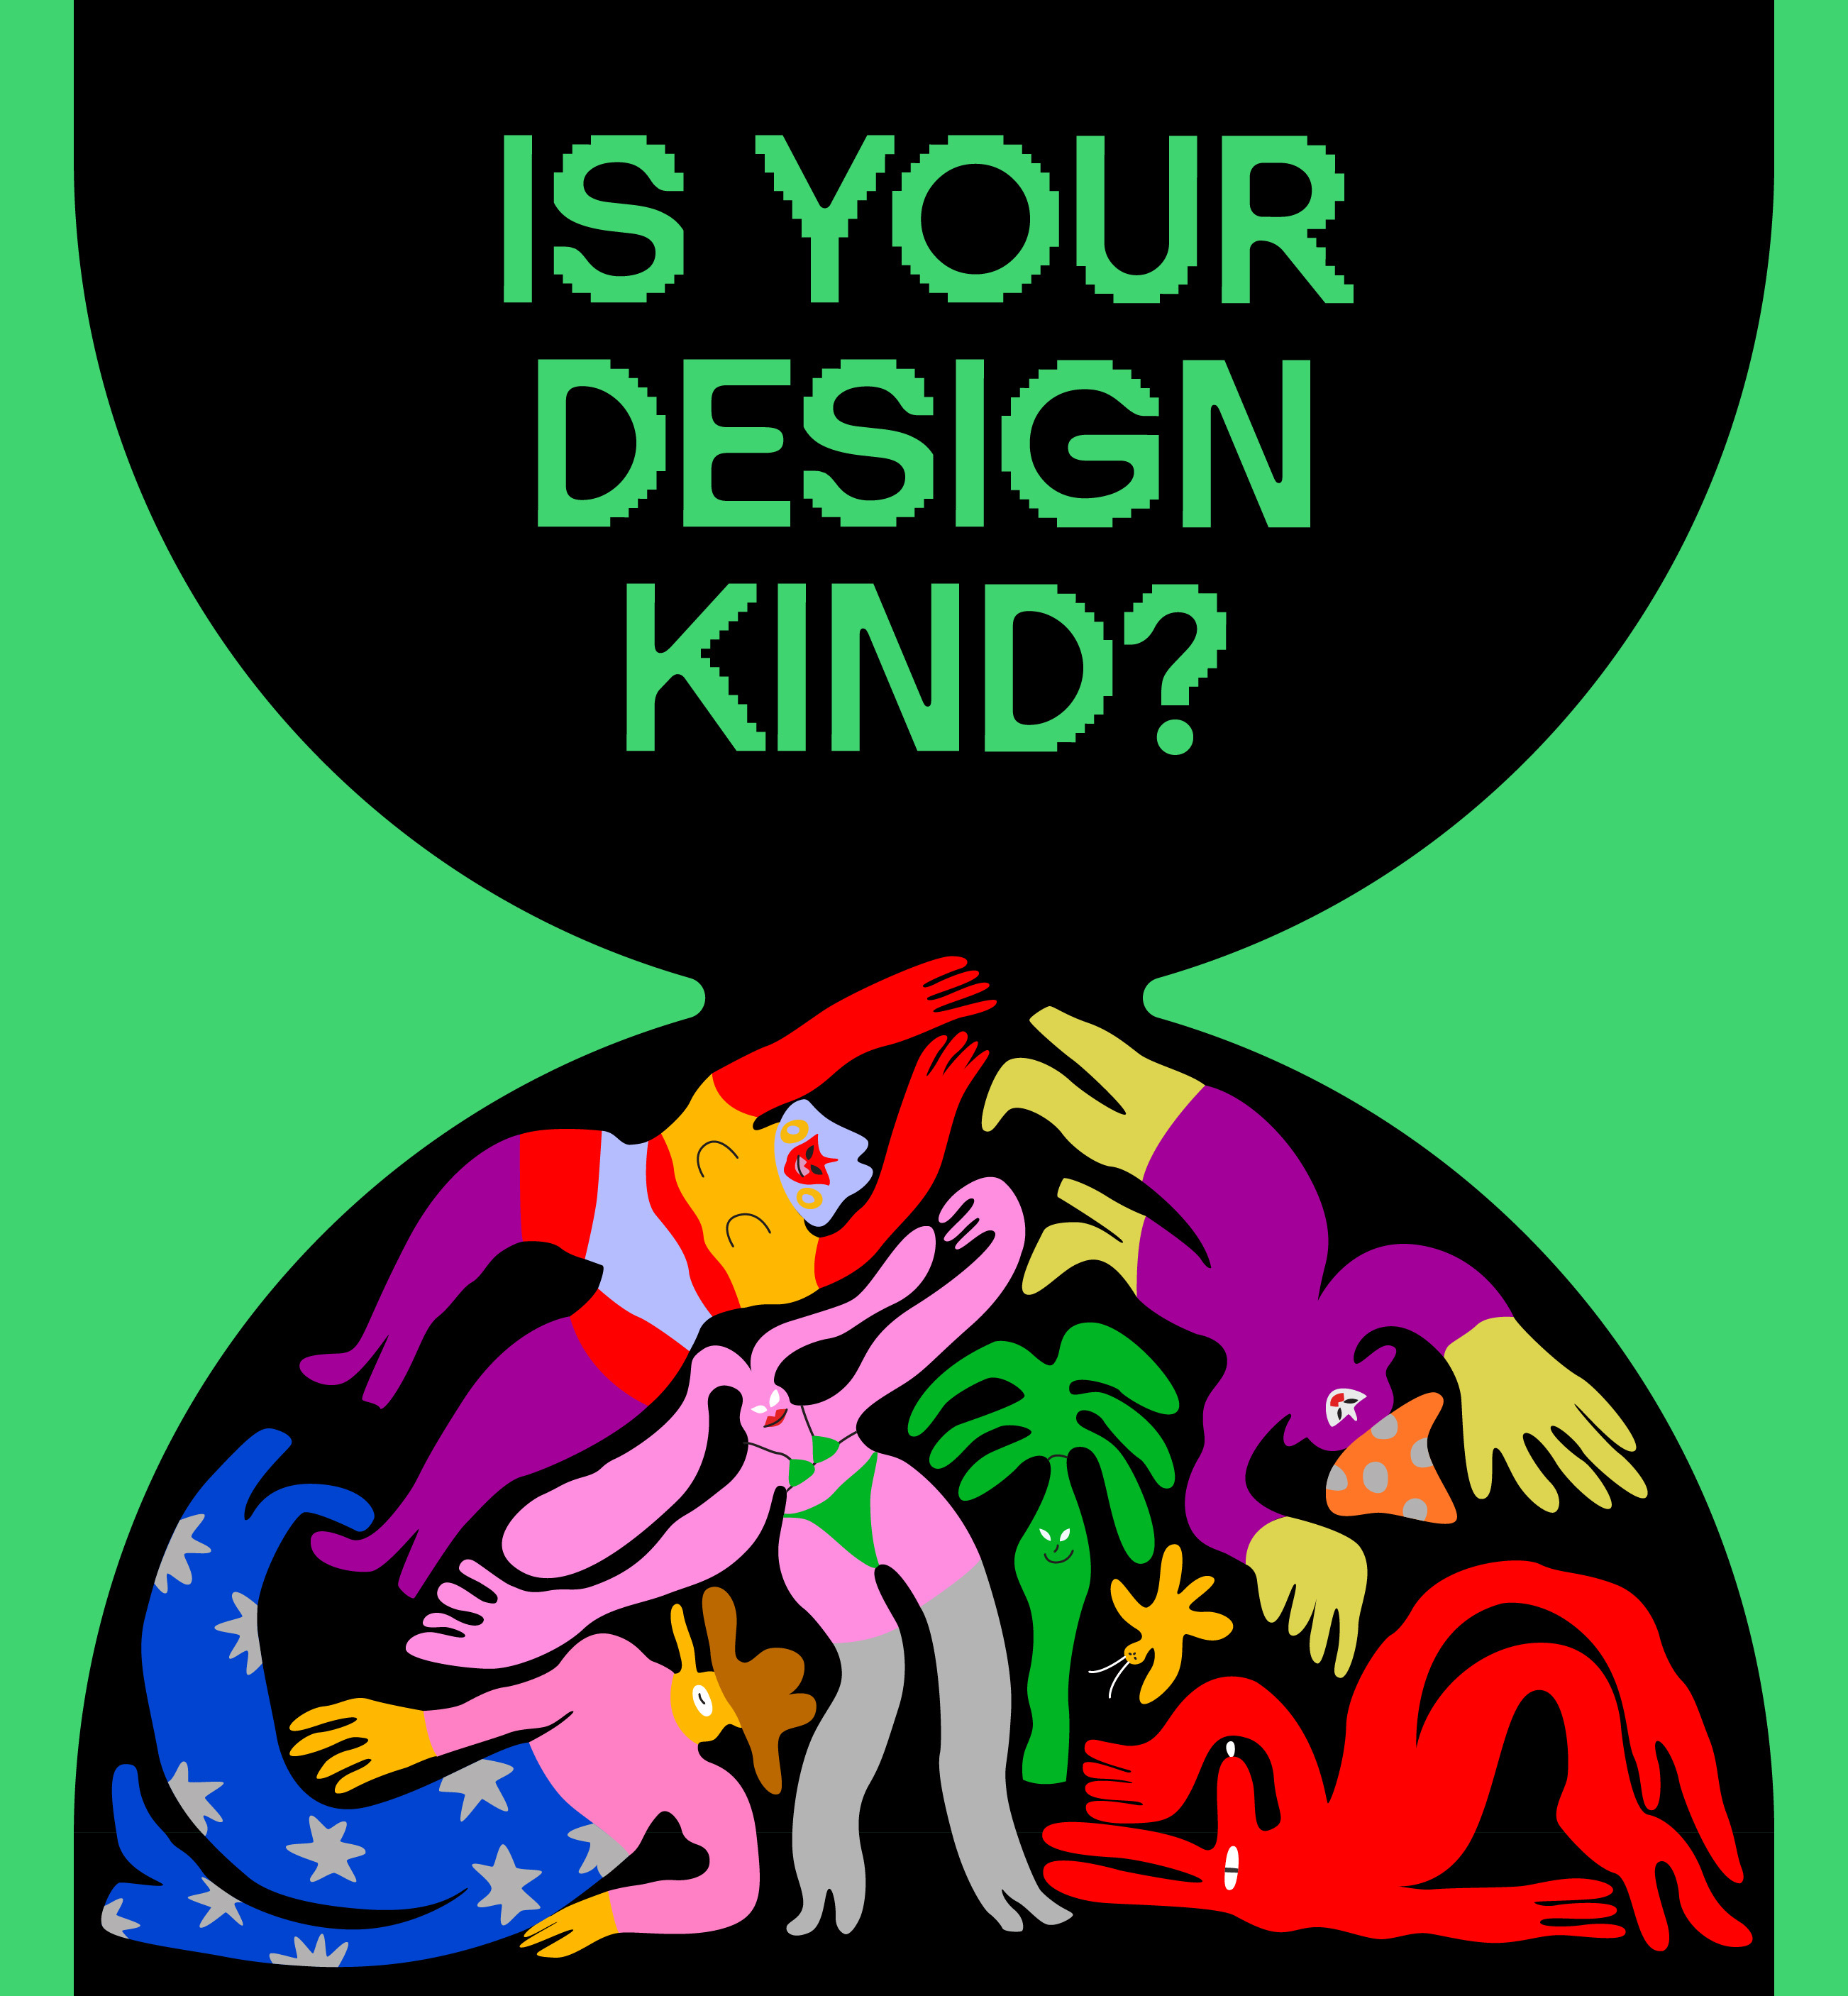 Lithuanian International Design Day 2024 in partnership with the International Council of Design's IDD24: is ti kind?